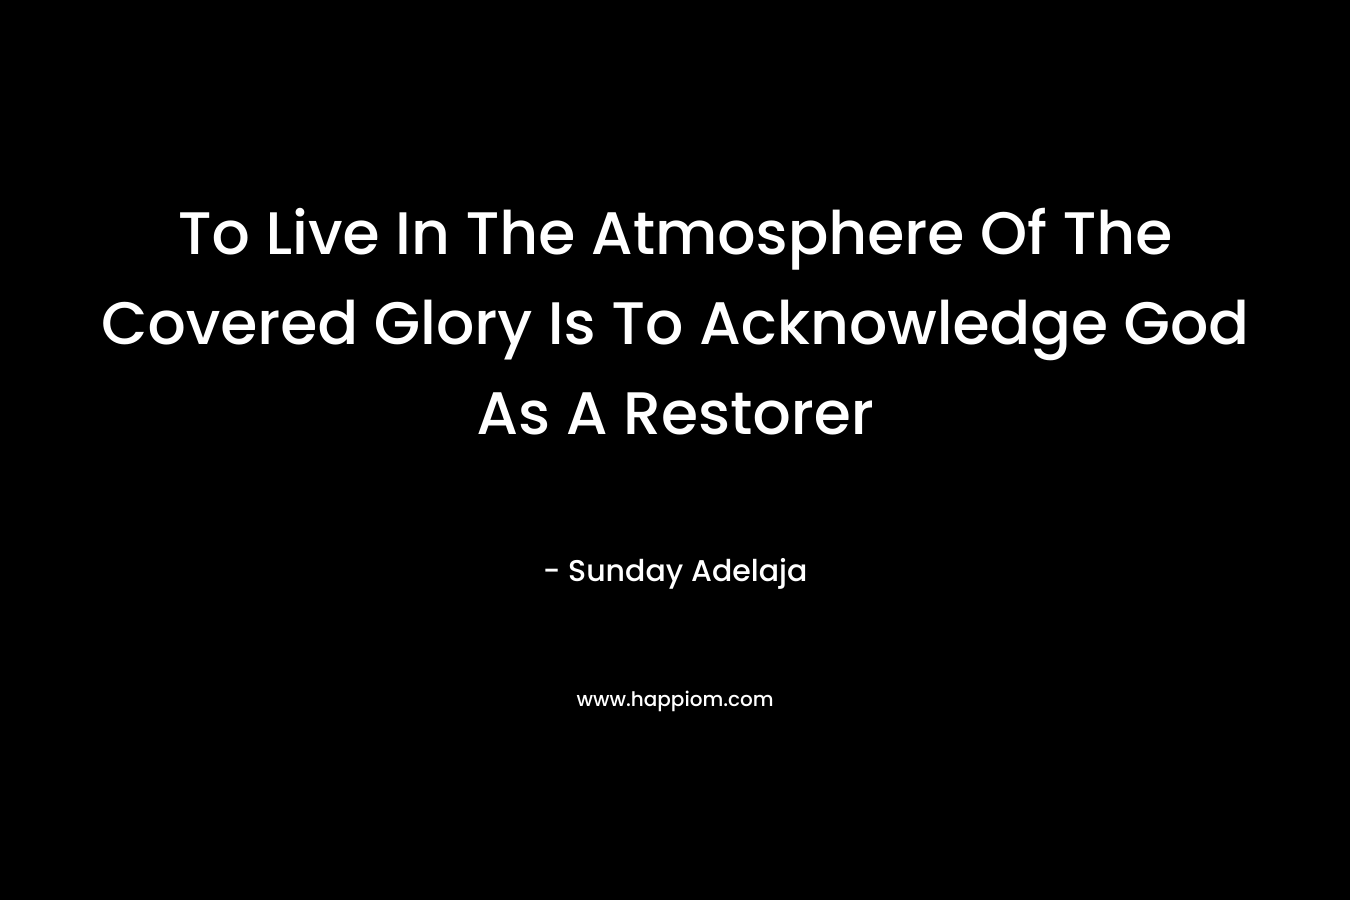 To Live In The Atmosphere Of The Covered Glory Is To Acknowledge God As A Restorer